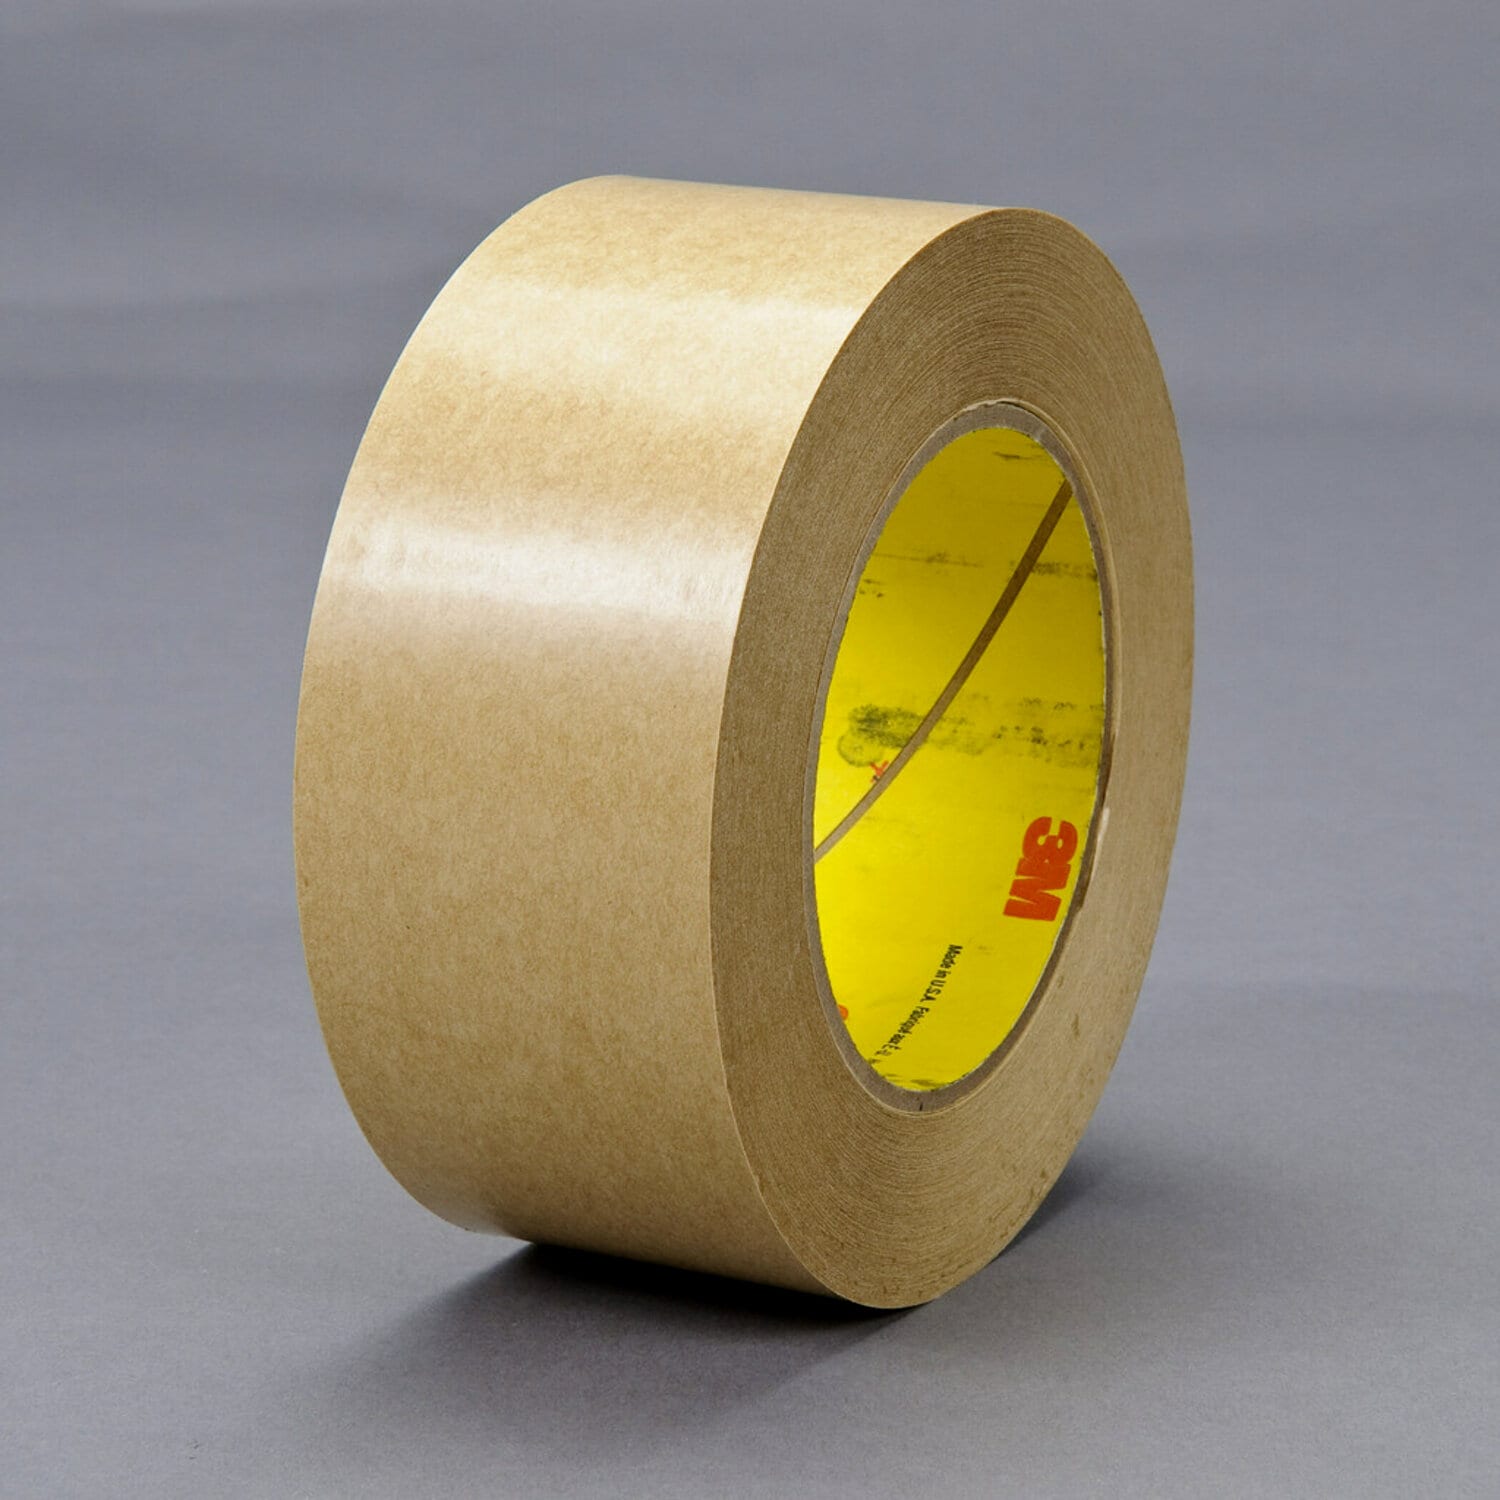 7100166354 - 3M Adhesive Transfer Tape 465, Clear, 1 in x 540 yd, 2 mil, 9 rolls per
case